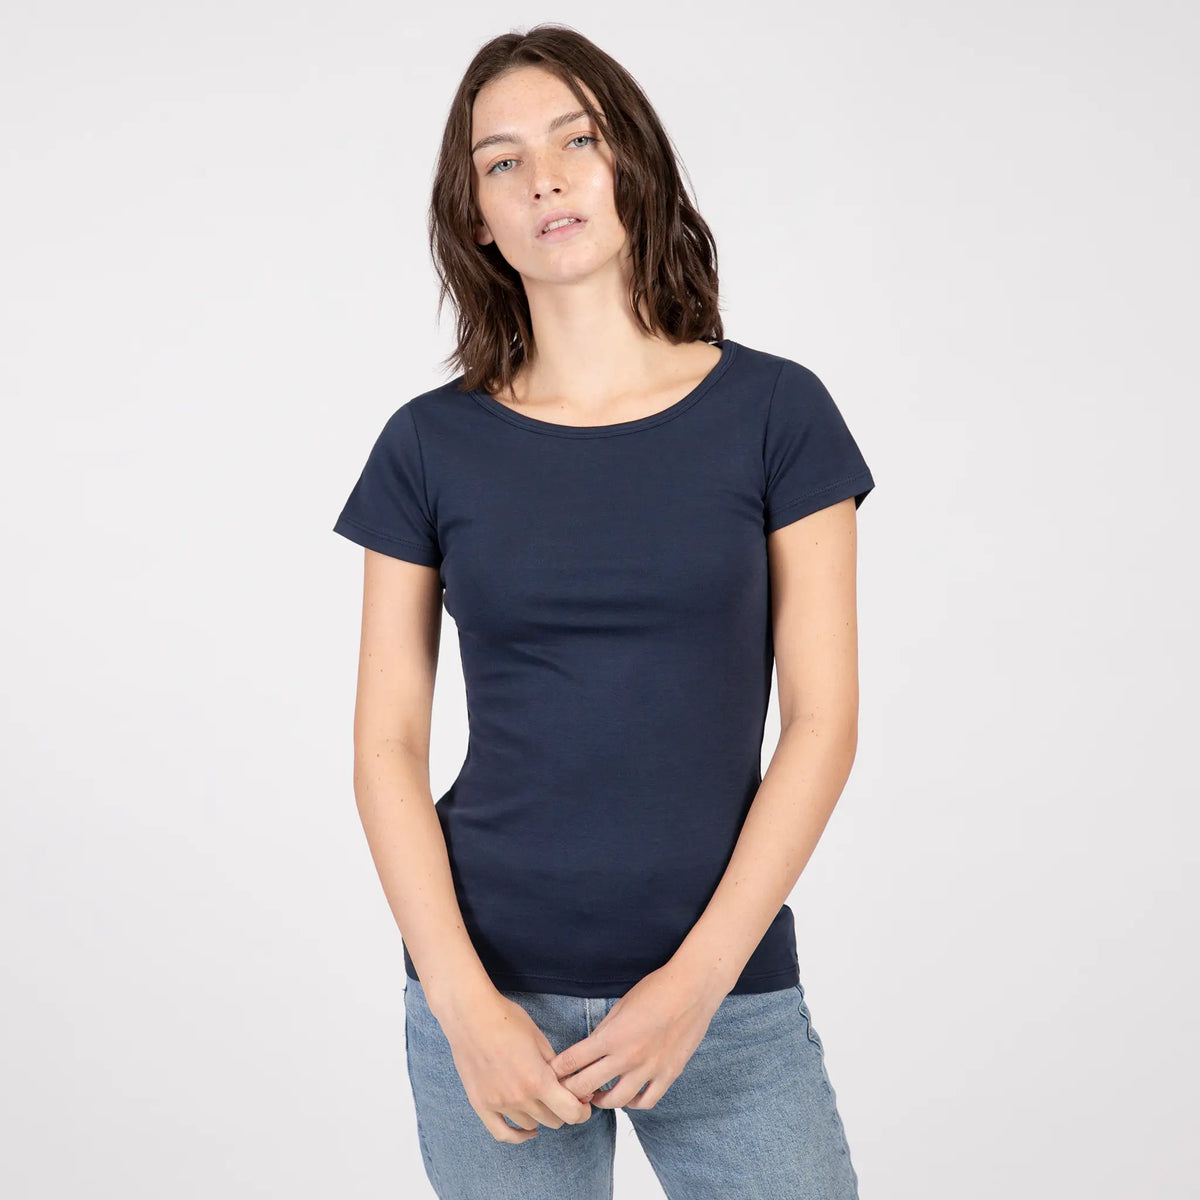 womens comfortable fit tshirt crew neck color navy blue